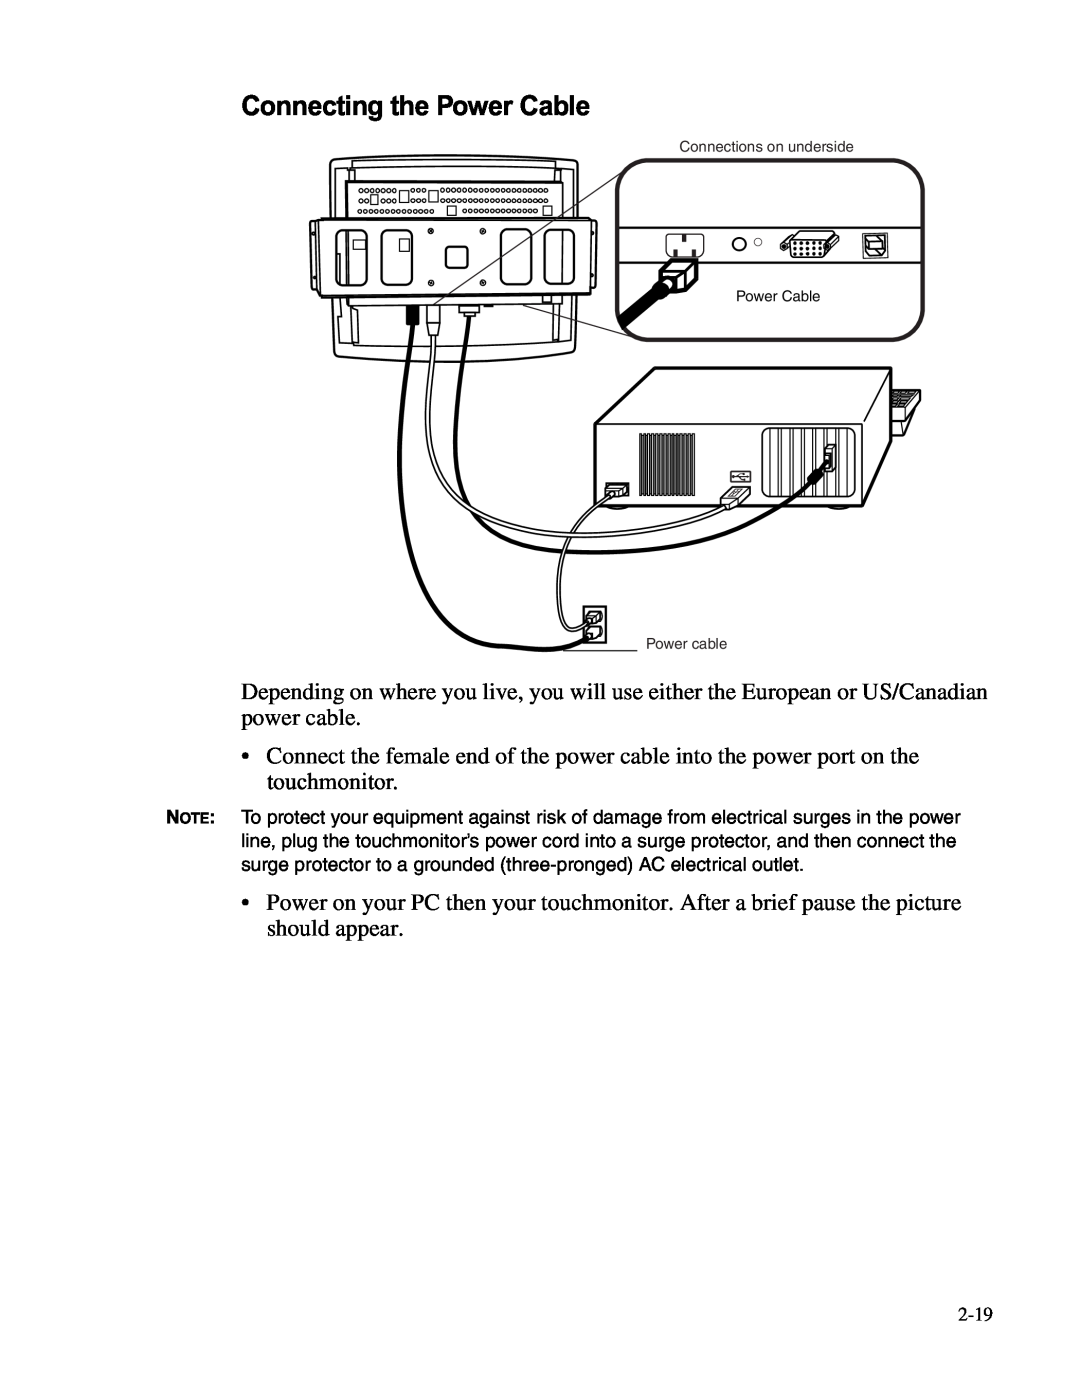 Elo TouchSystems LCD manual Connecting the Power Cable, Connections on underside, Power cable 